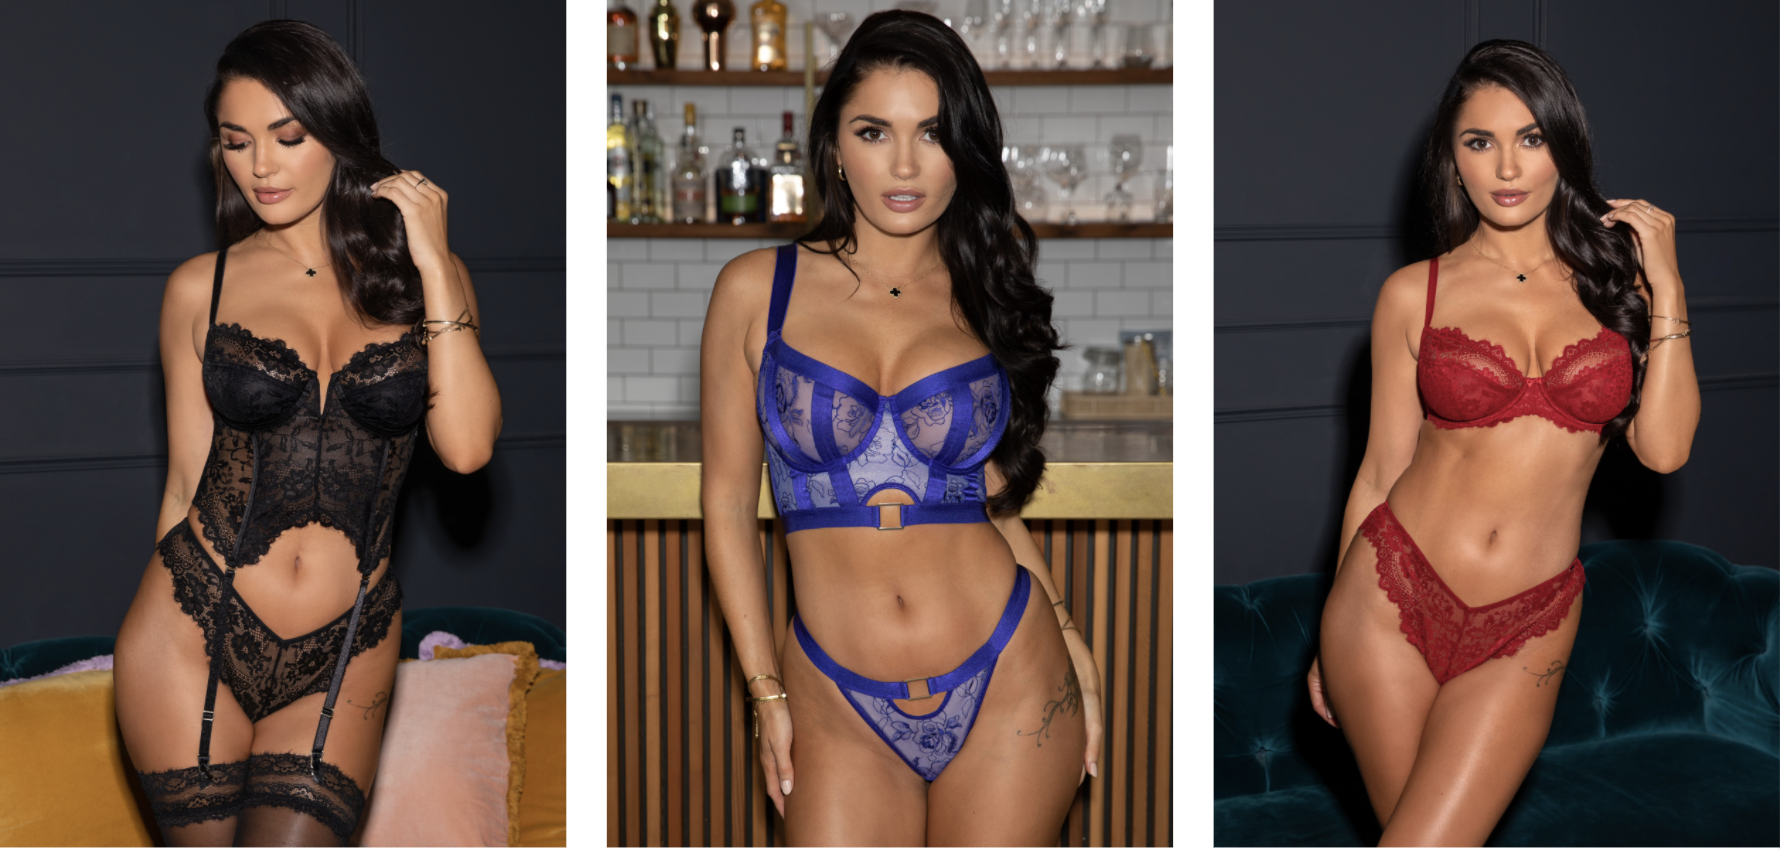 Send Off Season Sale - The Great Lingerie SOS Sale is Live on